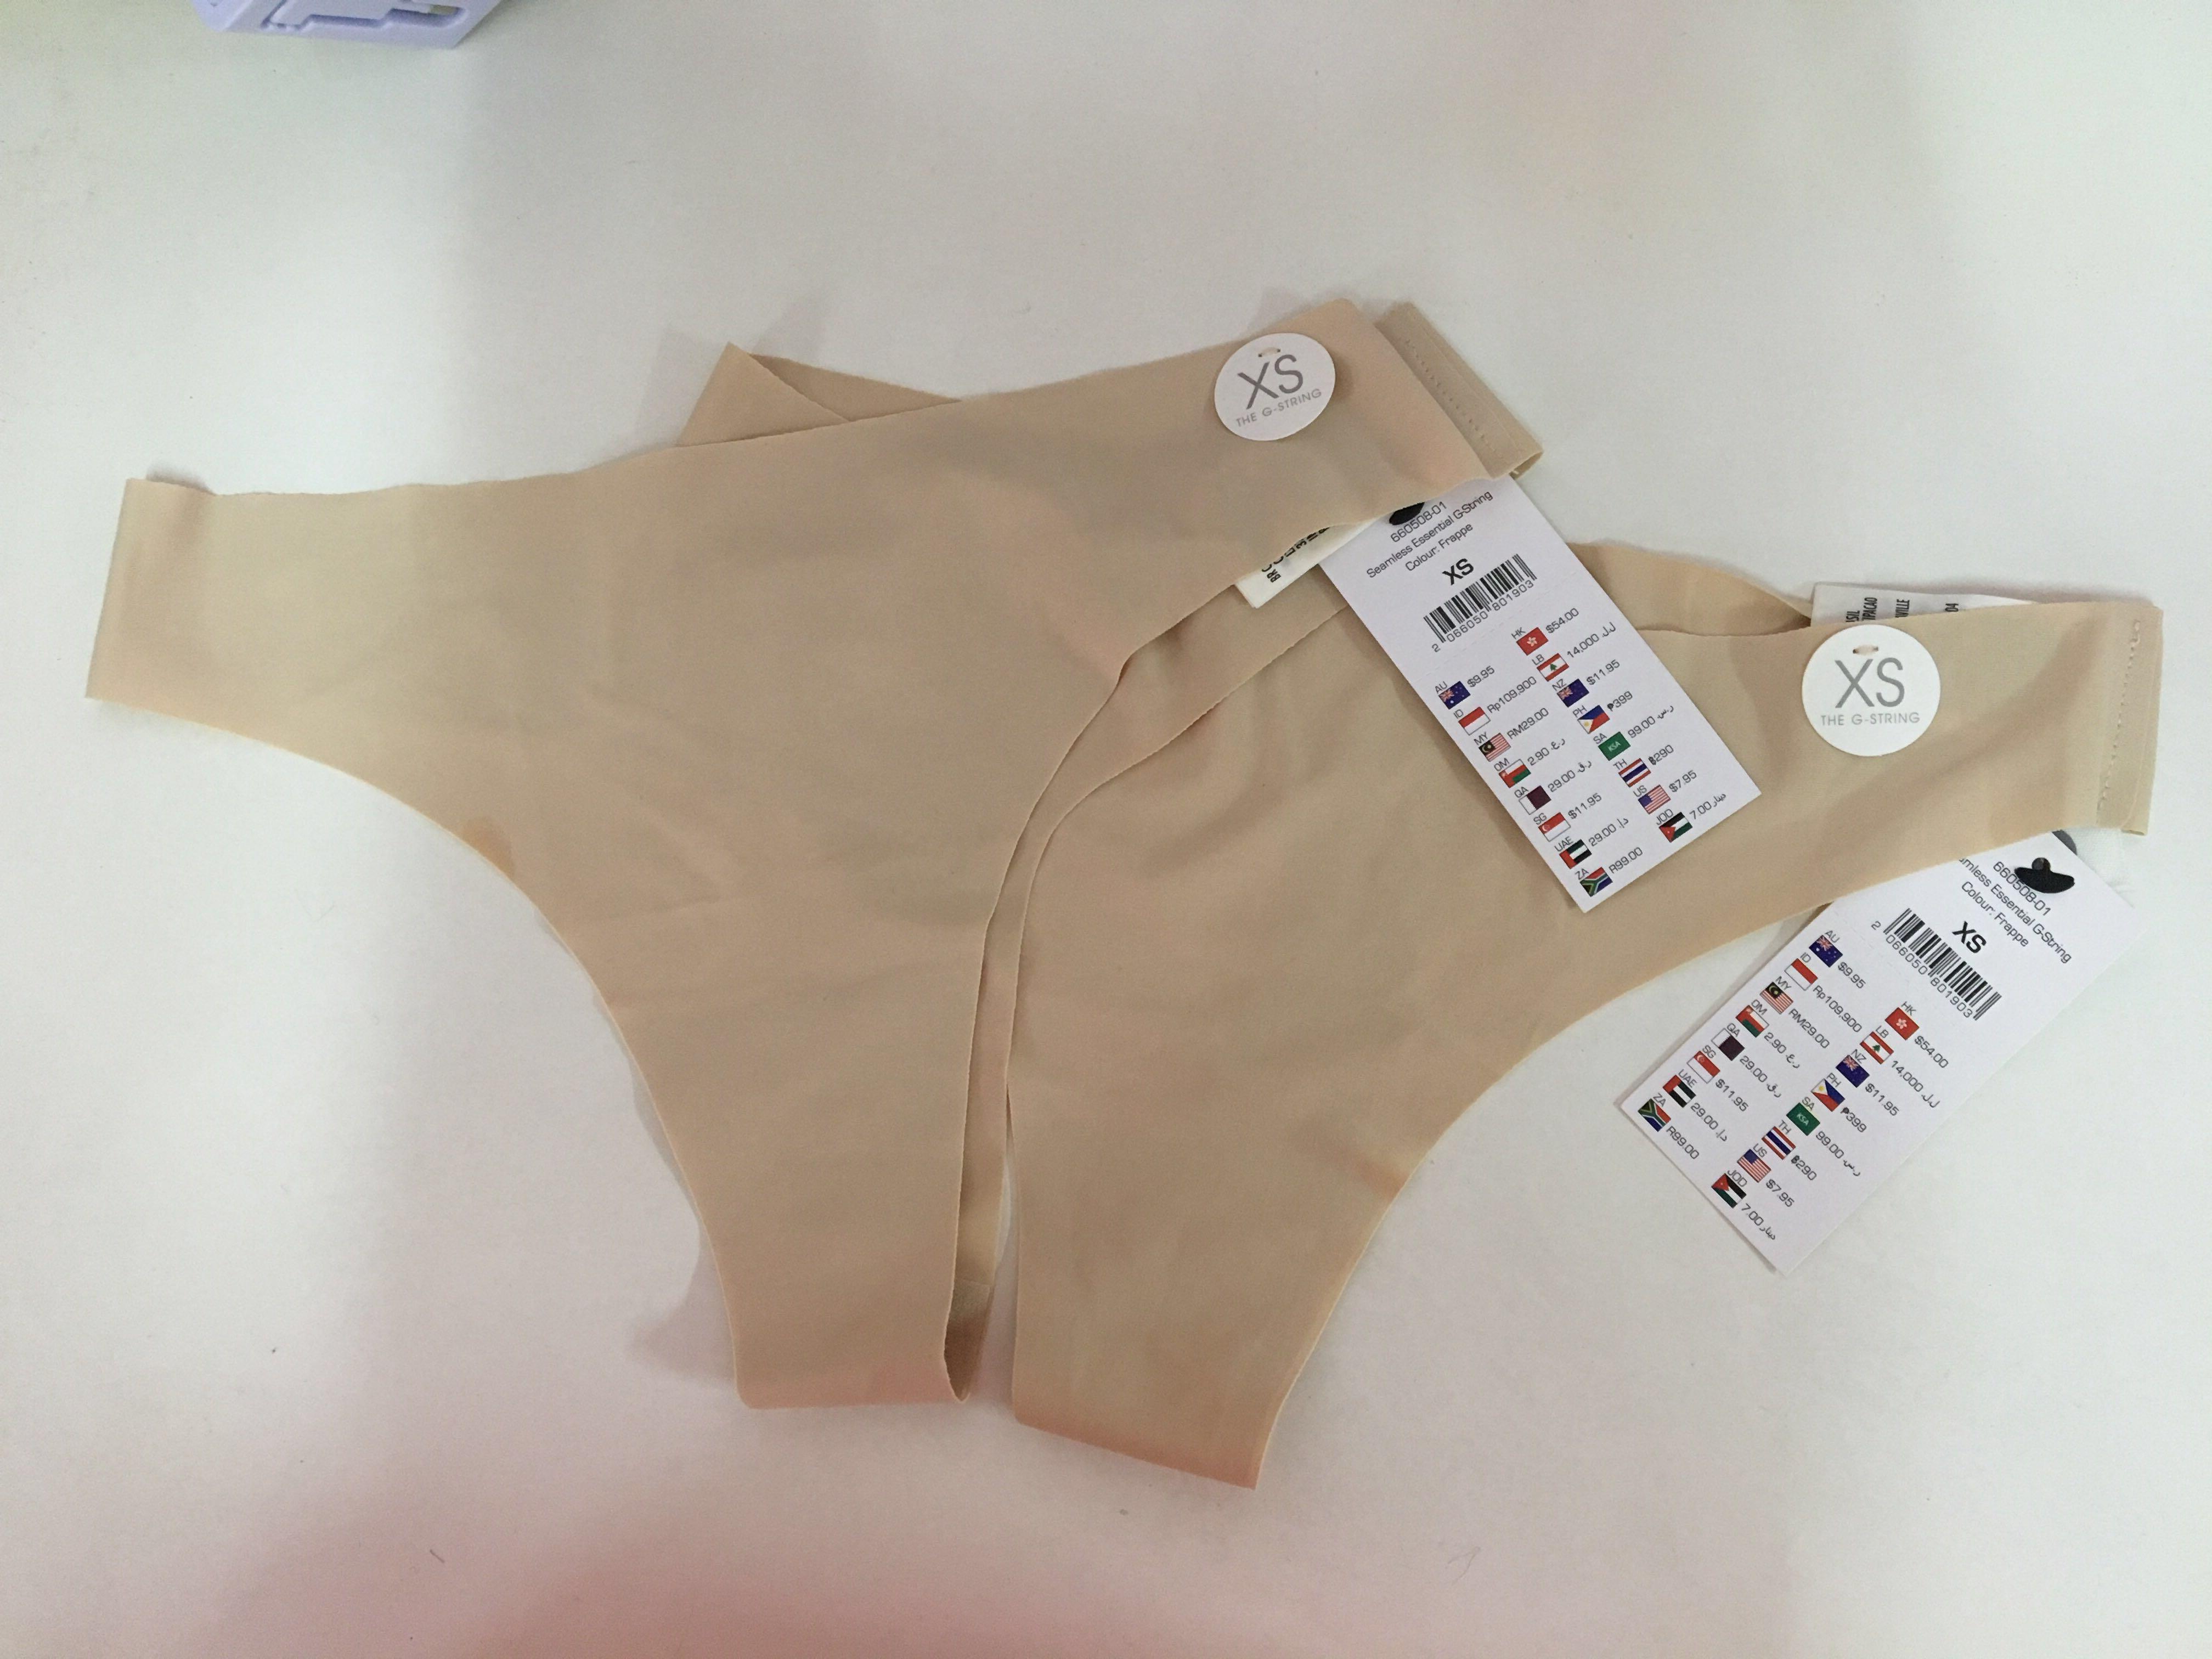 Cotton On Seamless Panty Thong G-String Nude Underwear XS, Women's Fashion,  New Undergarments & Loungewear on Carousell